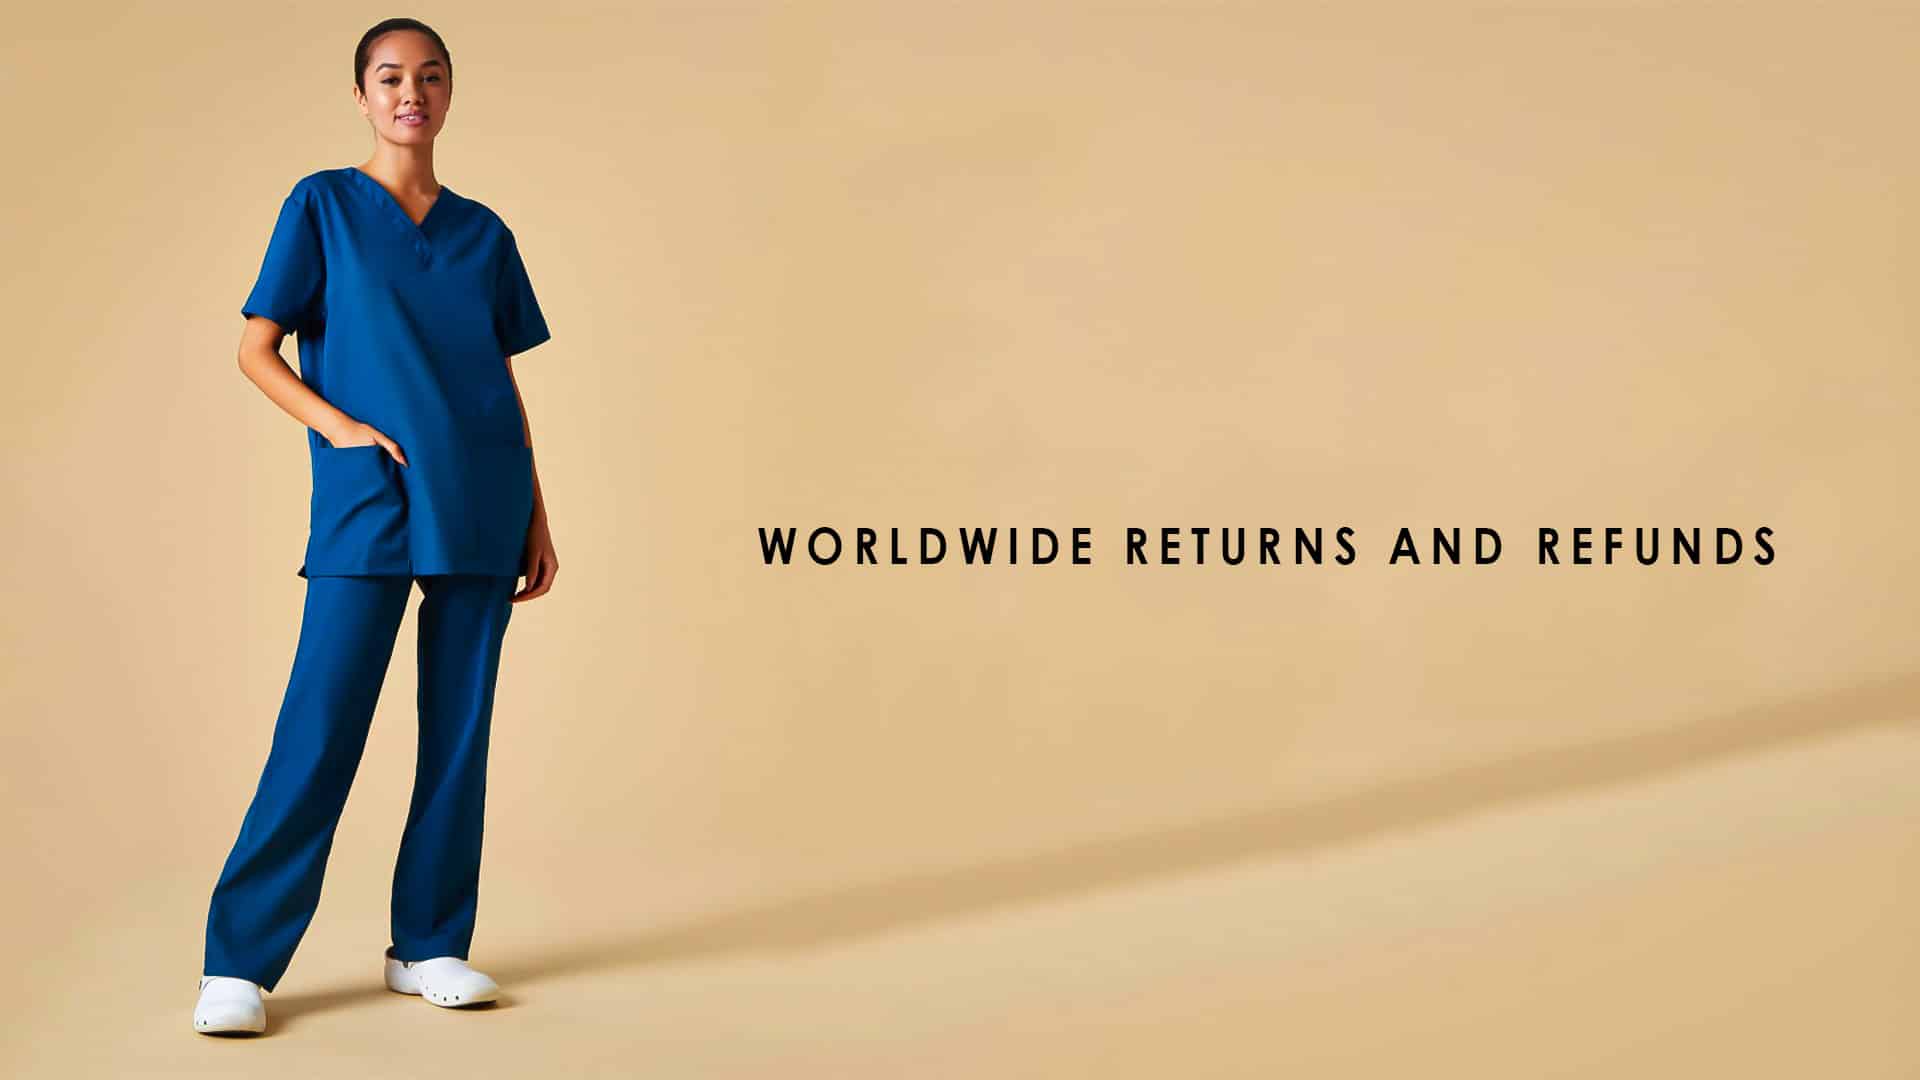 Worldwide returns and refunds